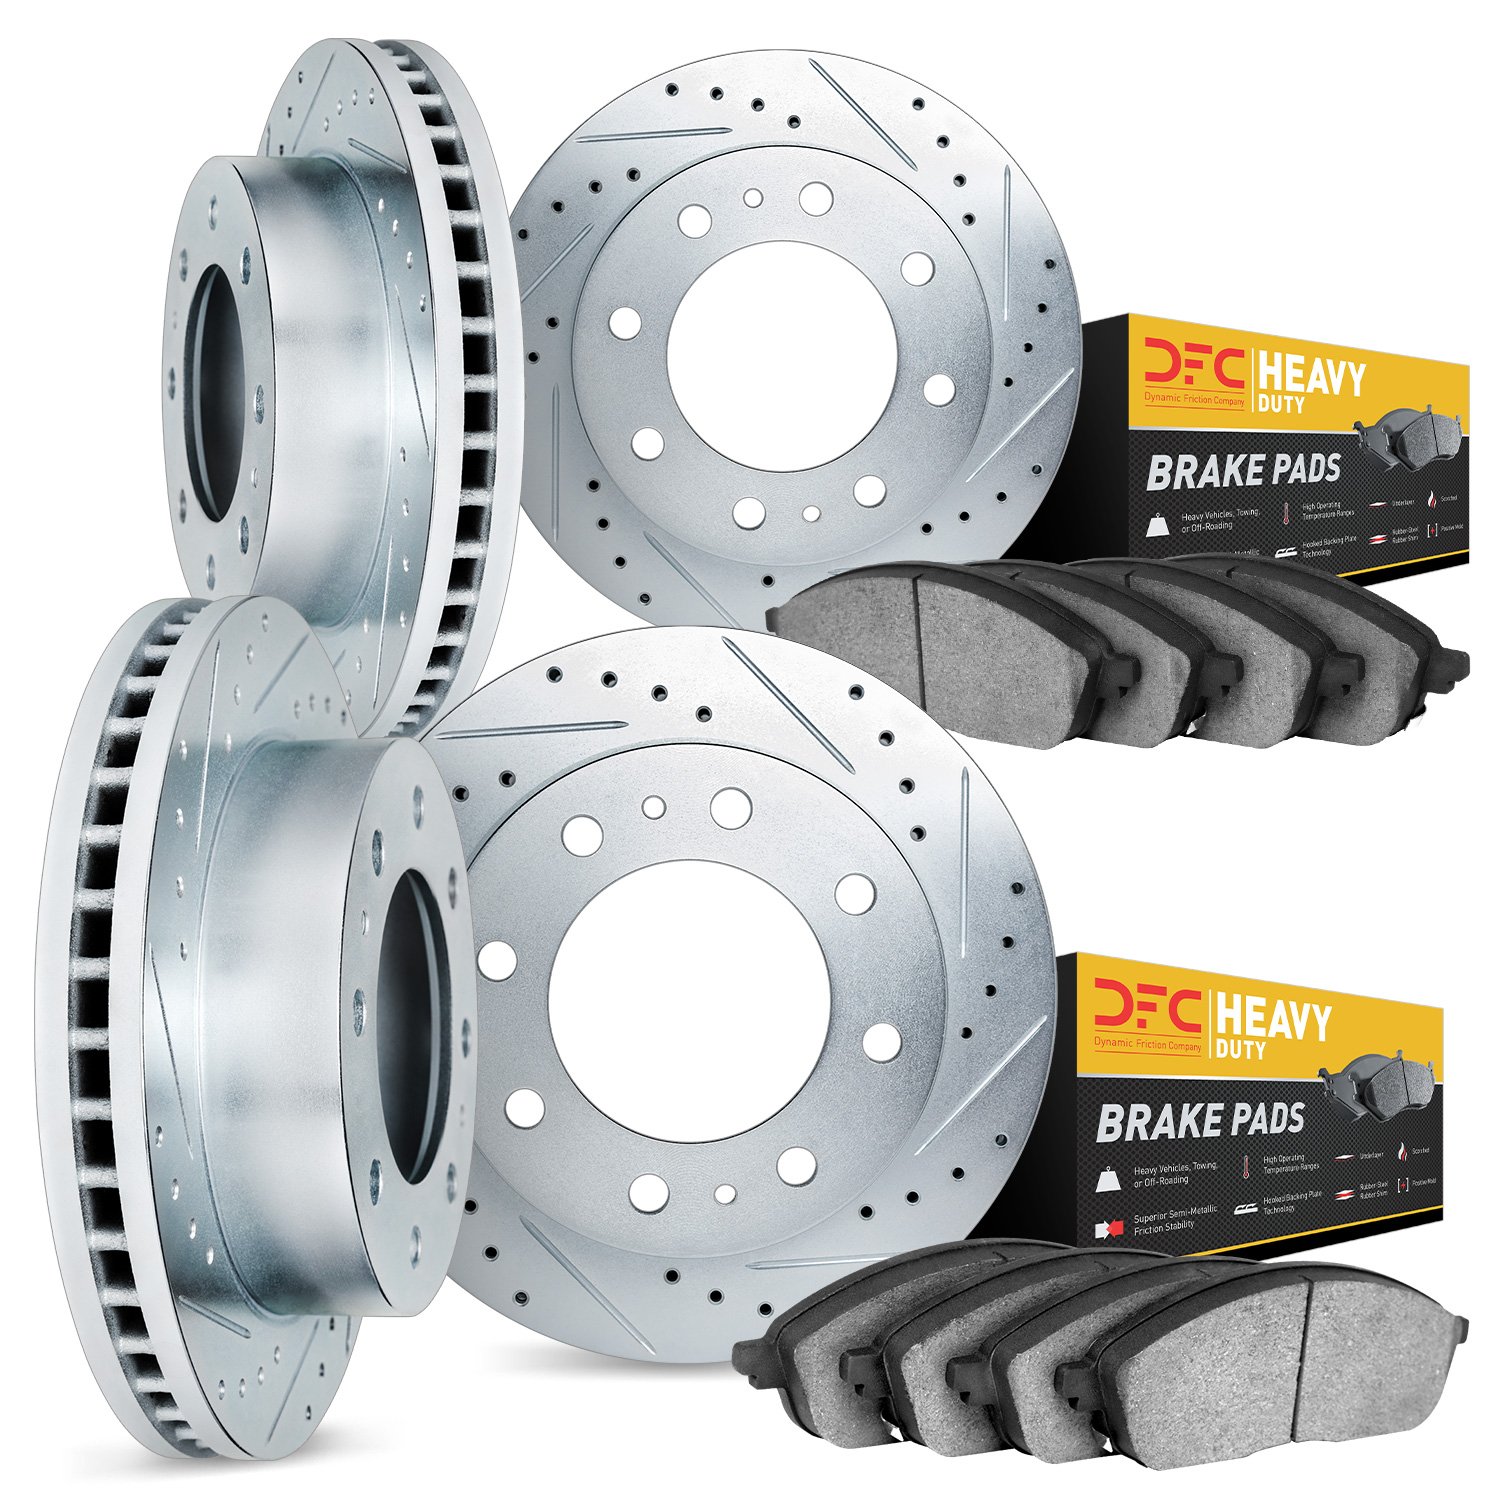 7204-99112 Drilled/Slotted Rotors w/Heavy-Duty Brake Pads Kit [Silver], Fits Select Ford/Lincoln/Mercury/Mazda, Position: Front